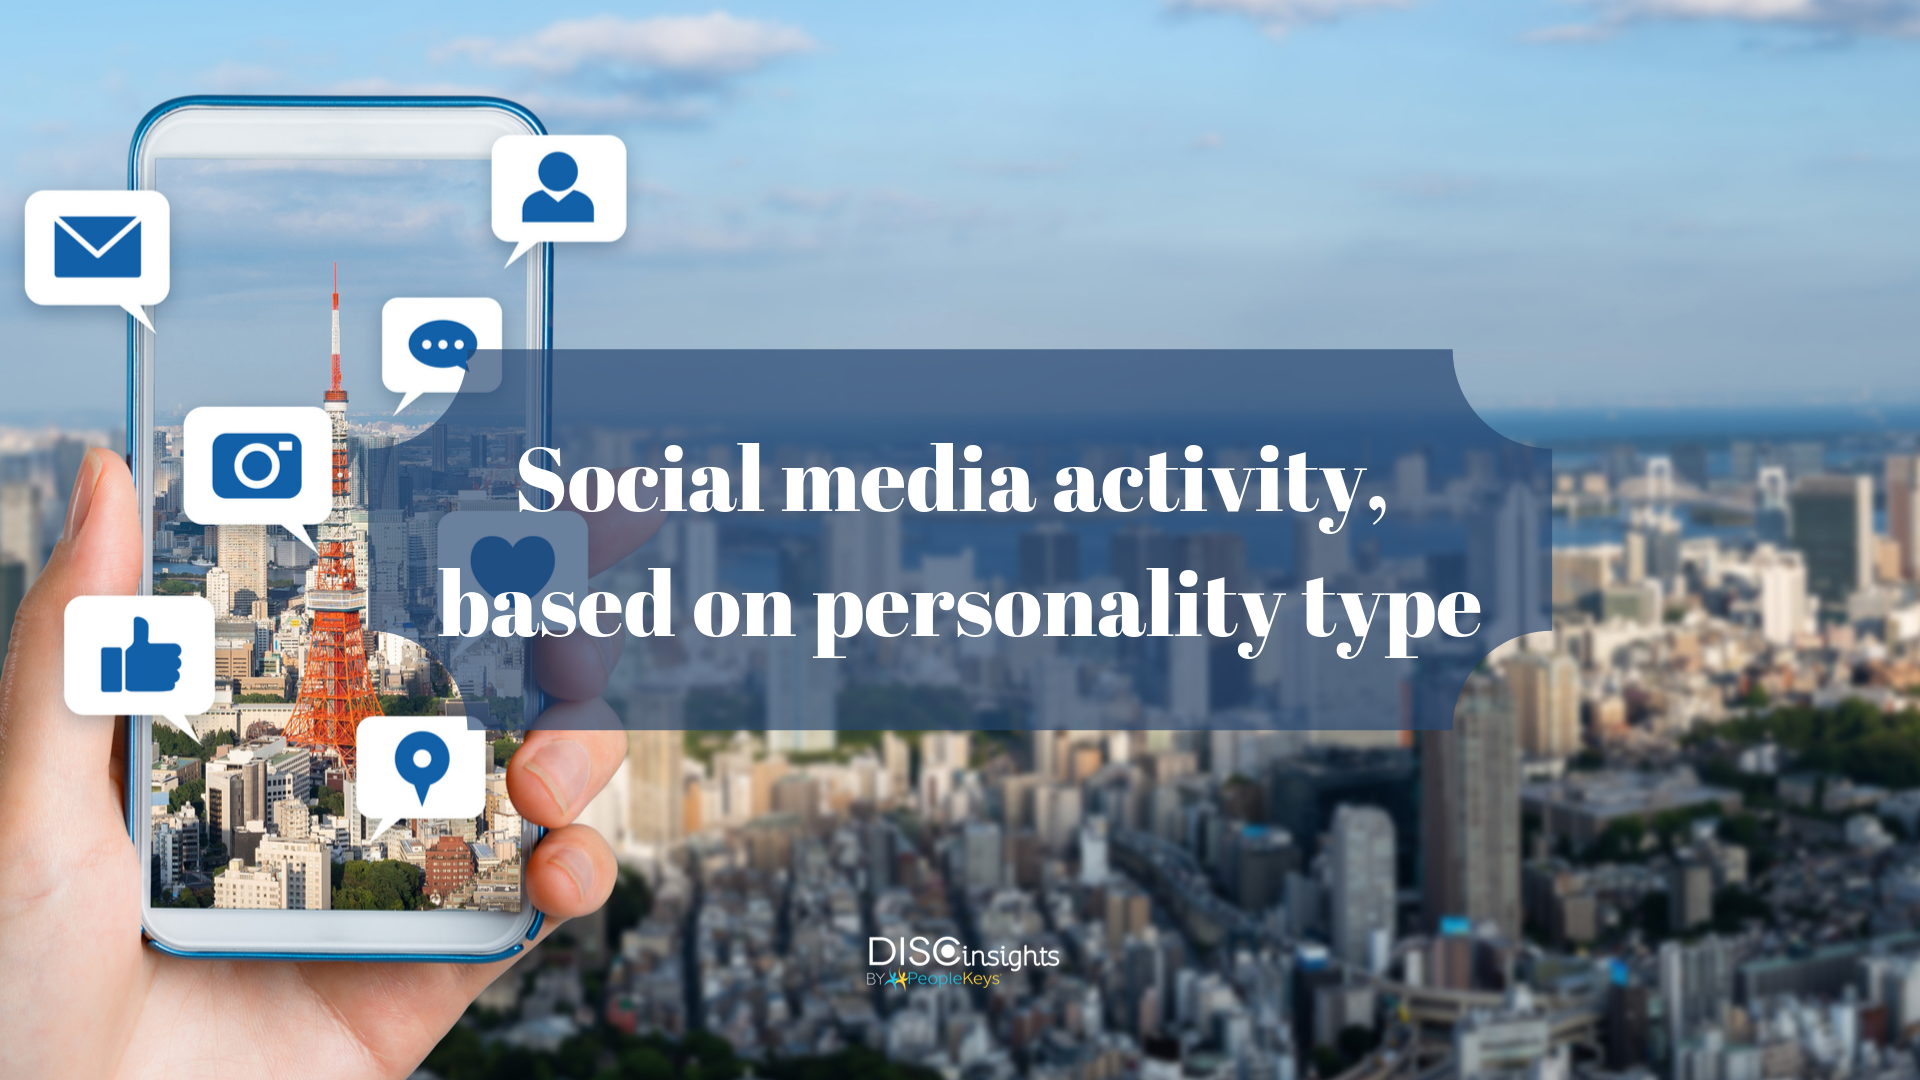 Social media activity, based on personality type